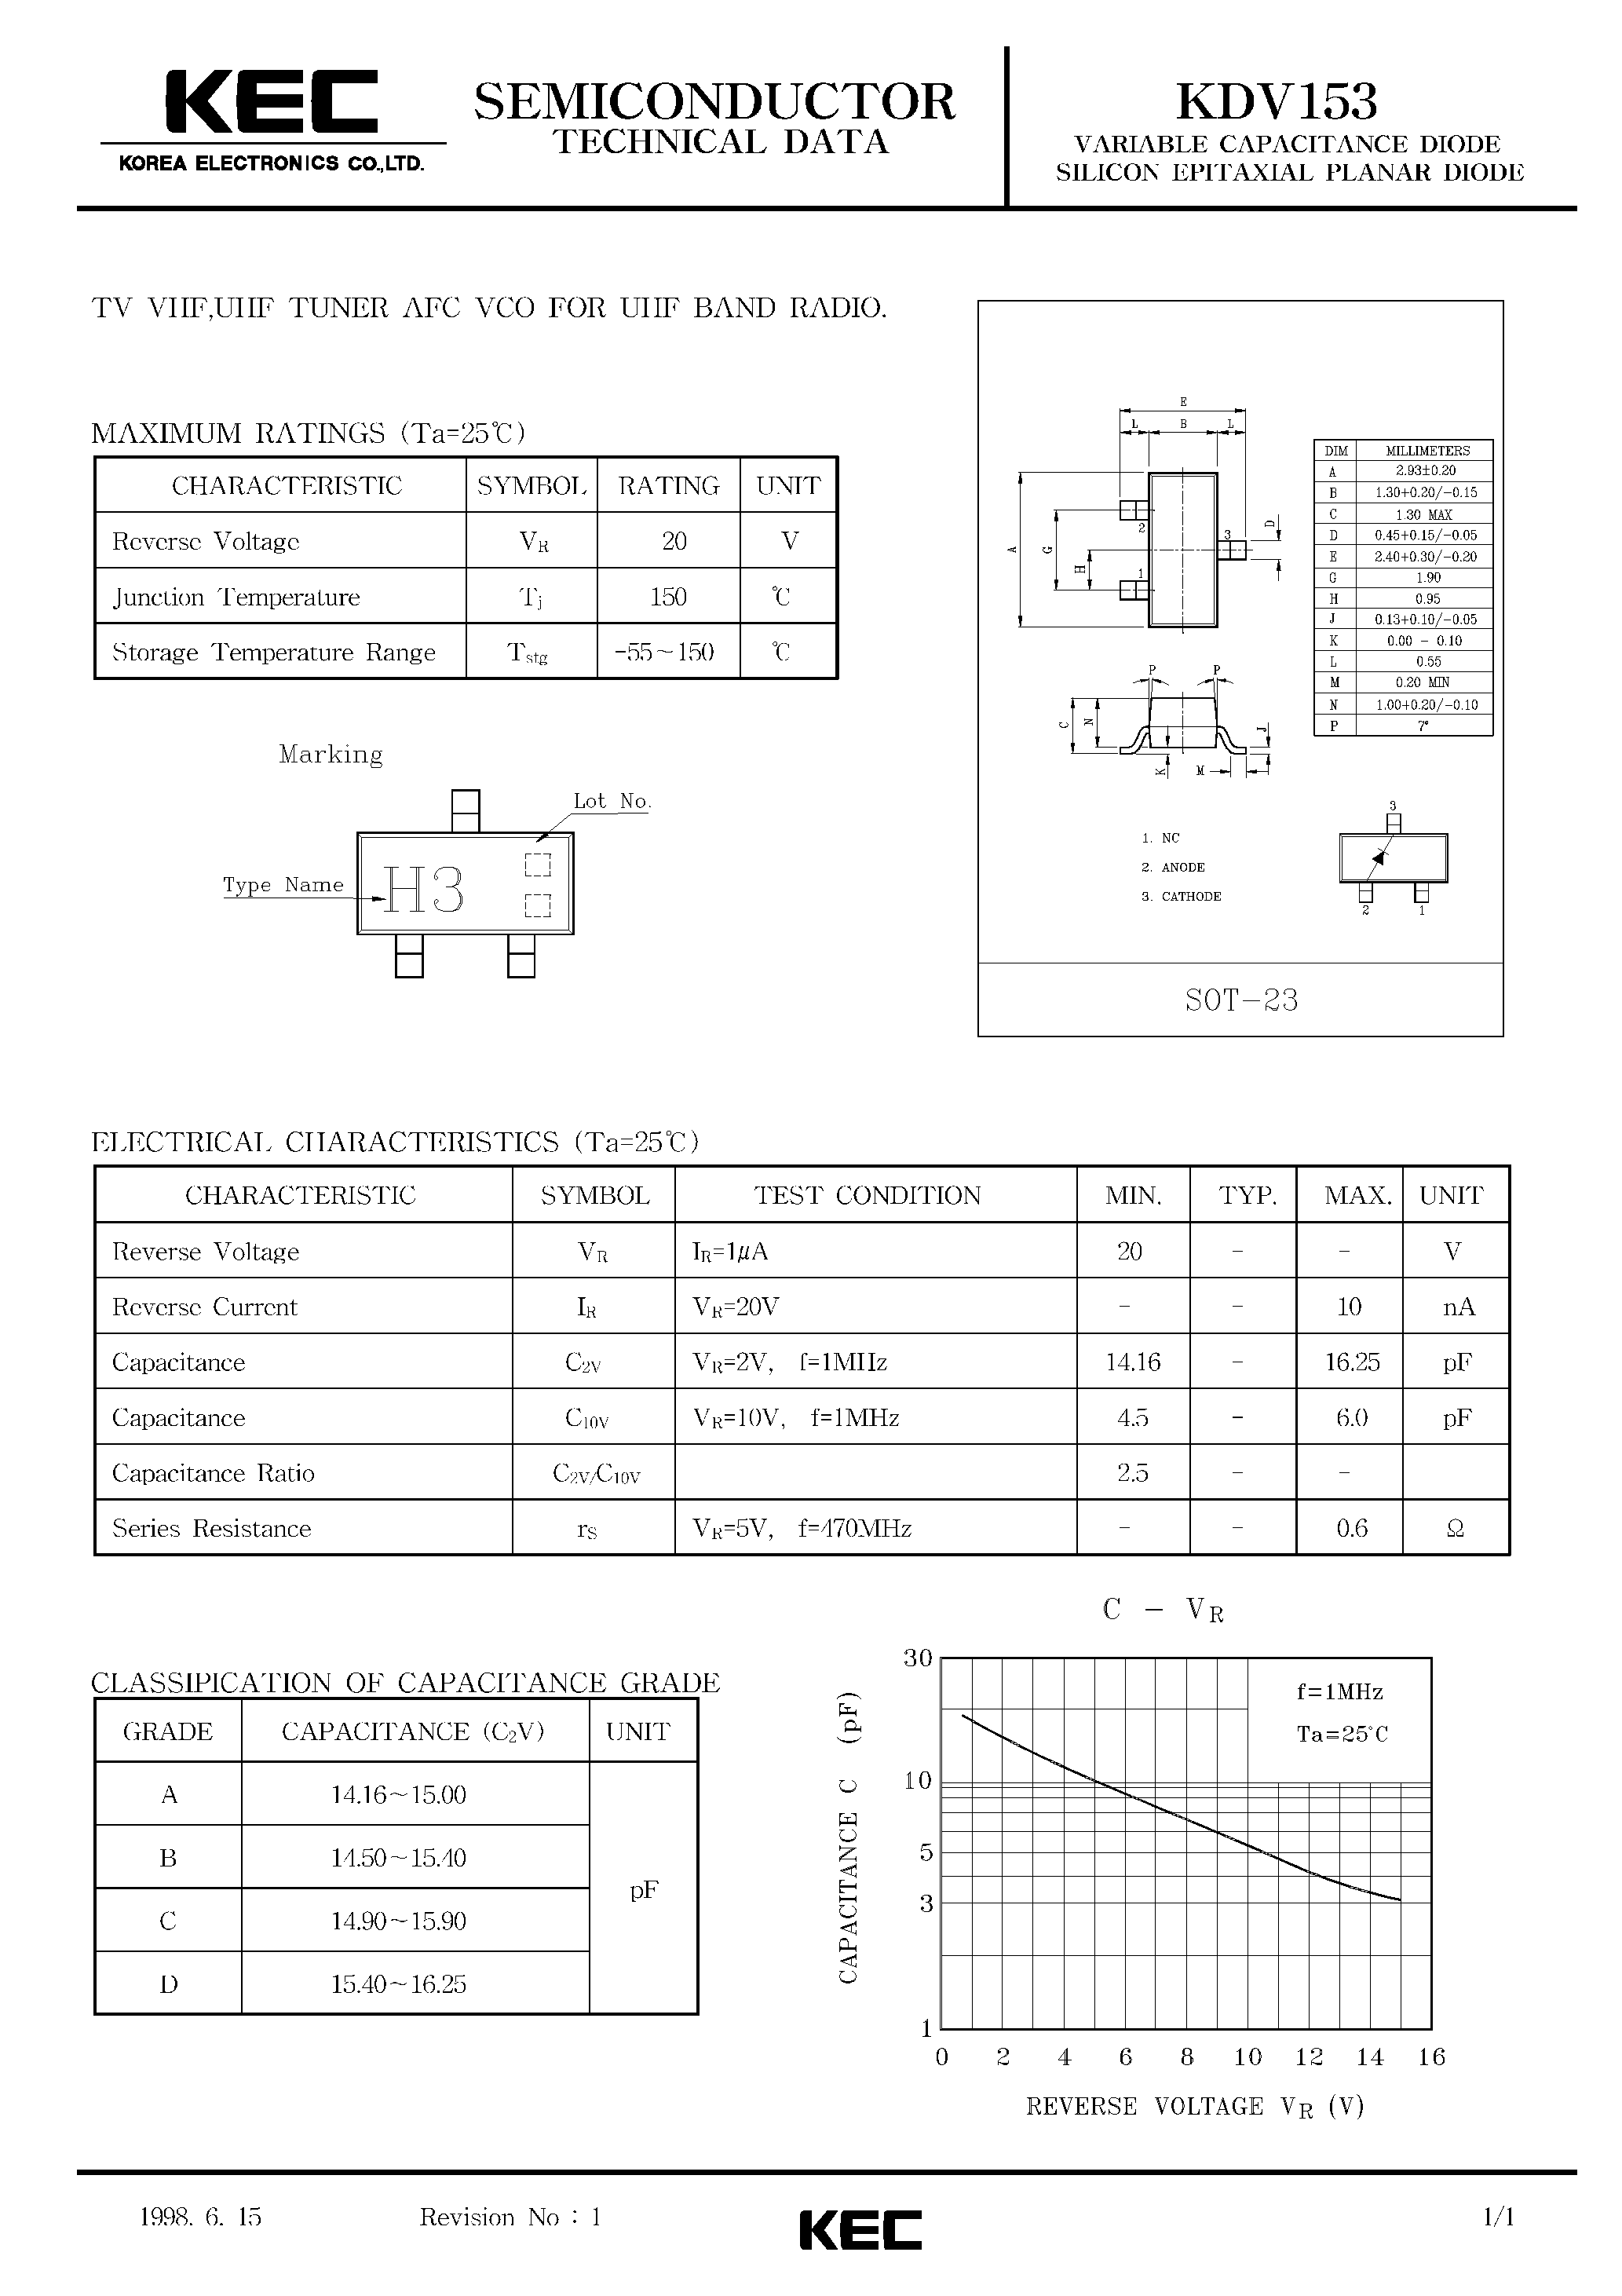 Datasheet KDV153 - VARIABLE CAPACITANCE DIODE SILICON EPITAXIAL PLANAR DIODE(TV VHF/UHF TUNER AFC VCO FOR UHF BAND RADIO) page 1